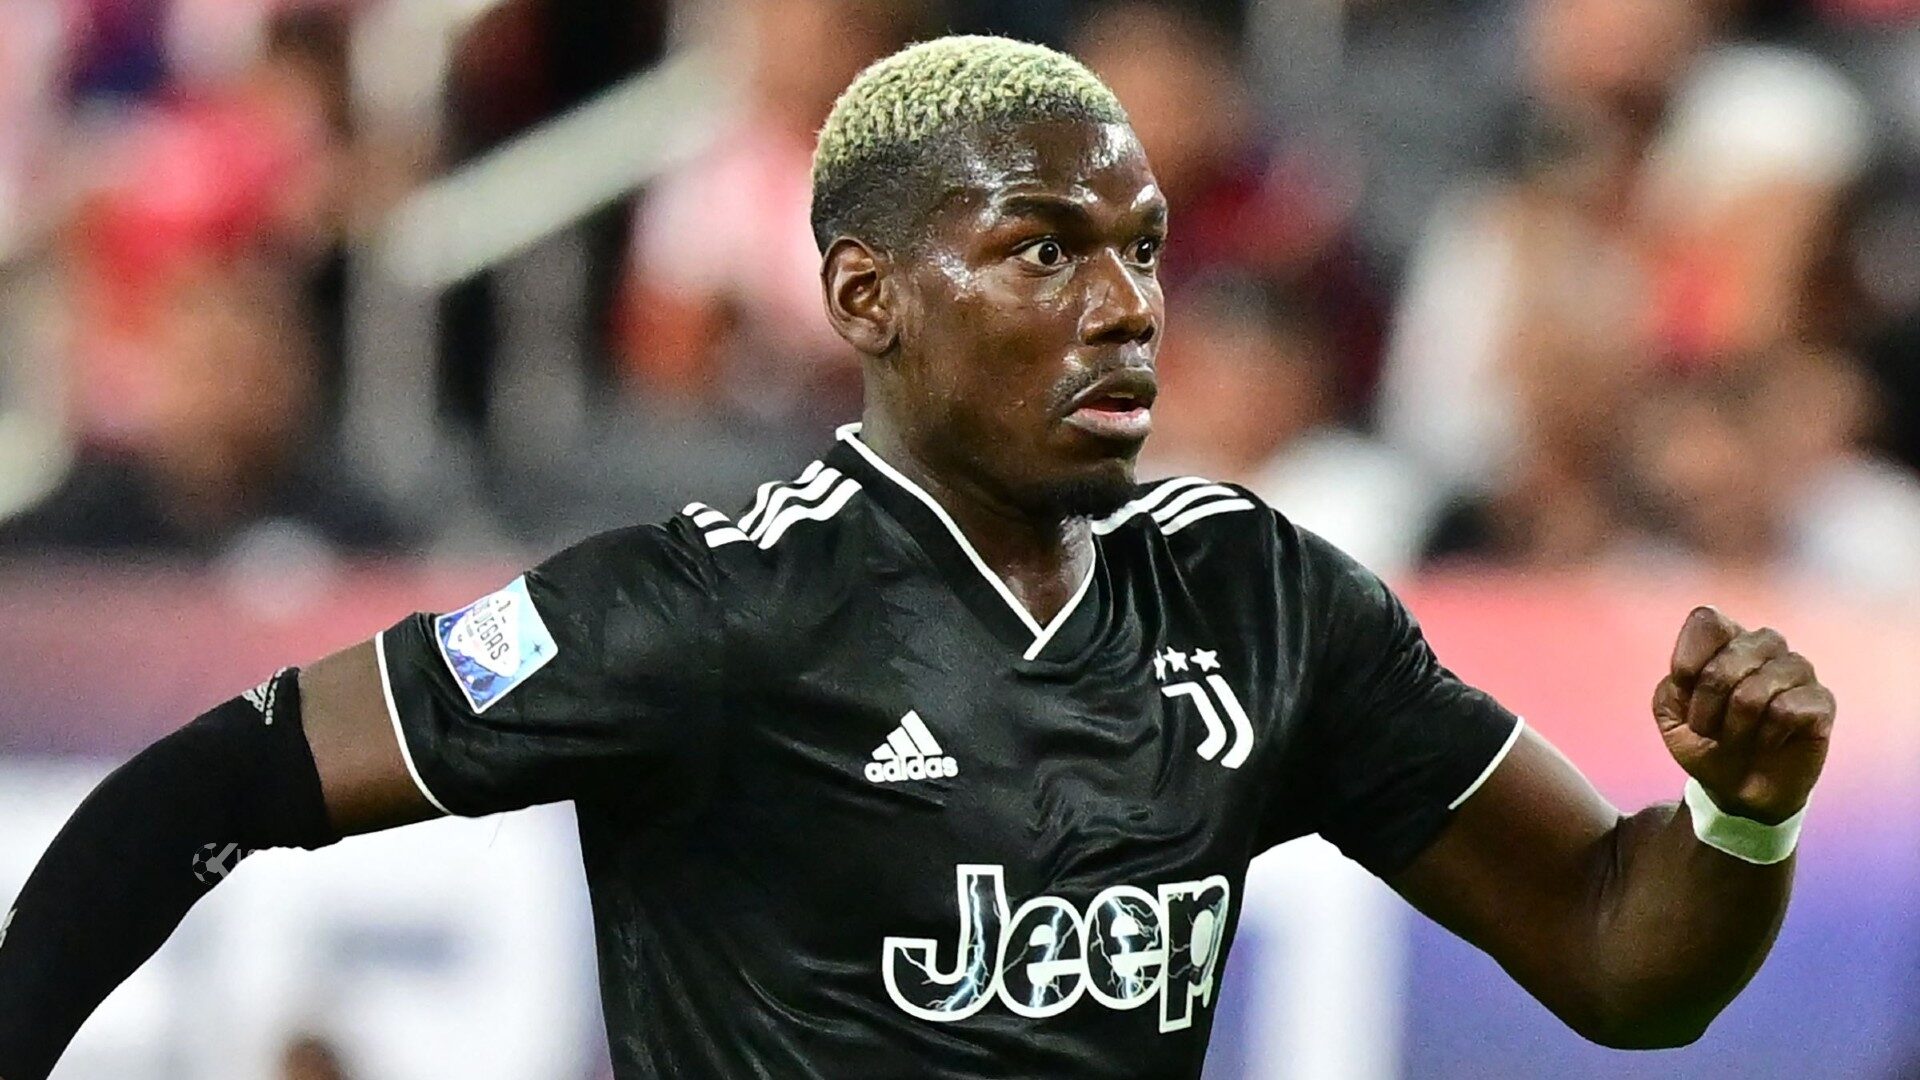 Paul Pogba reportedly accuses his brother of being part of €13m blackmail attempt | Friendlies